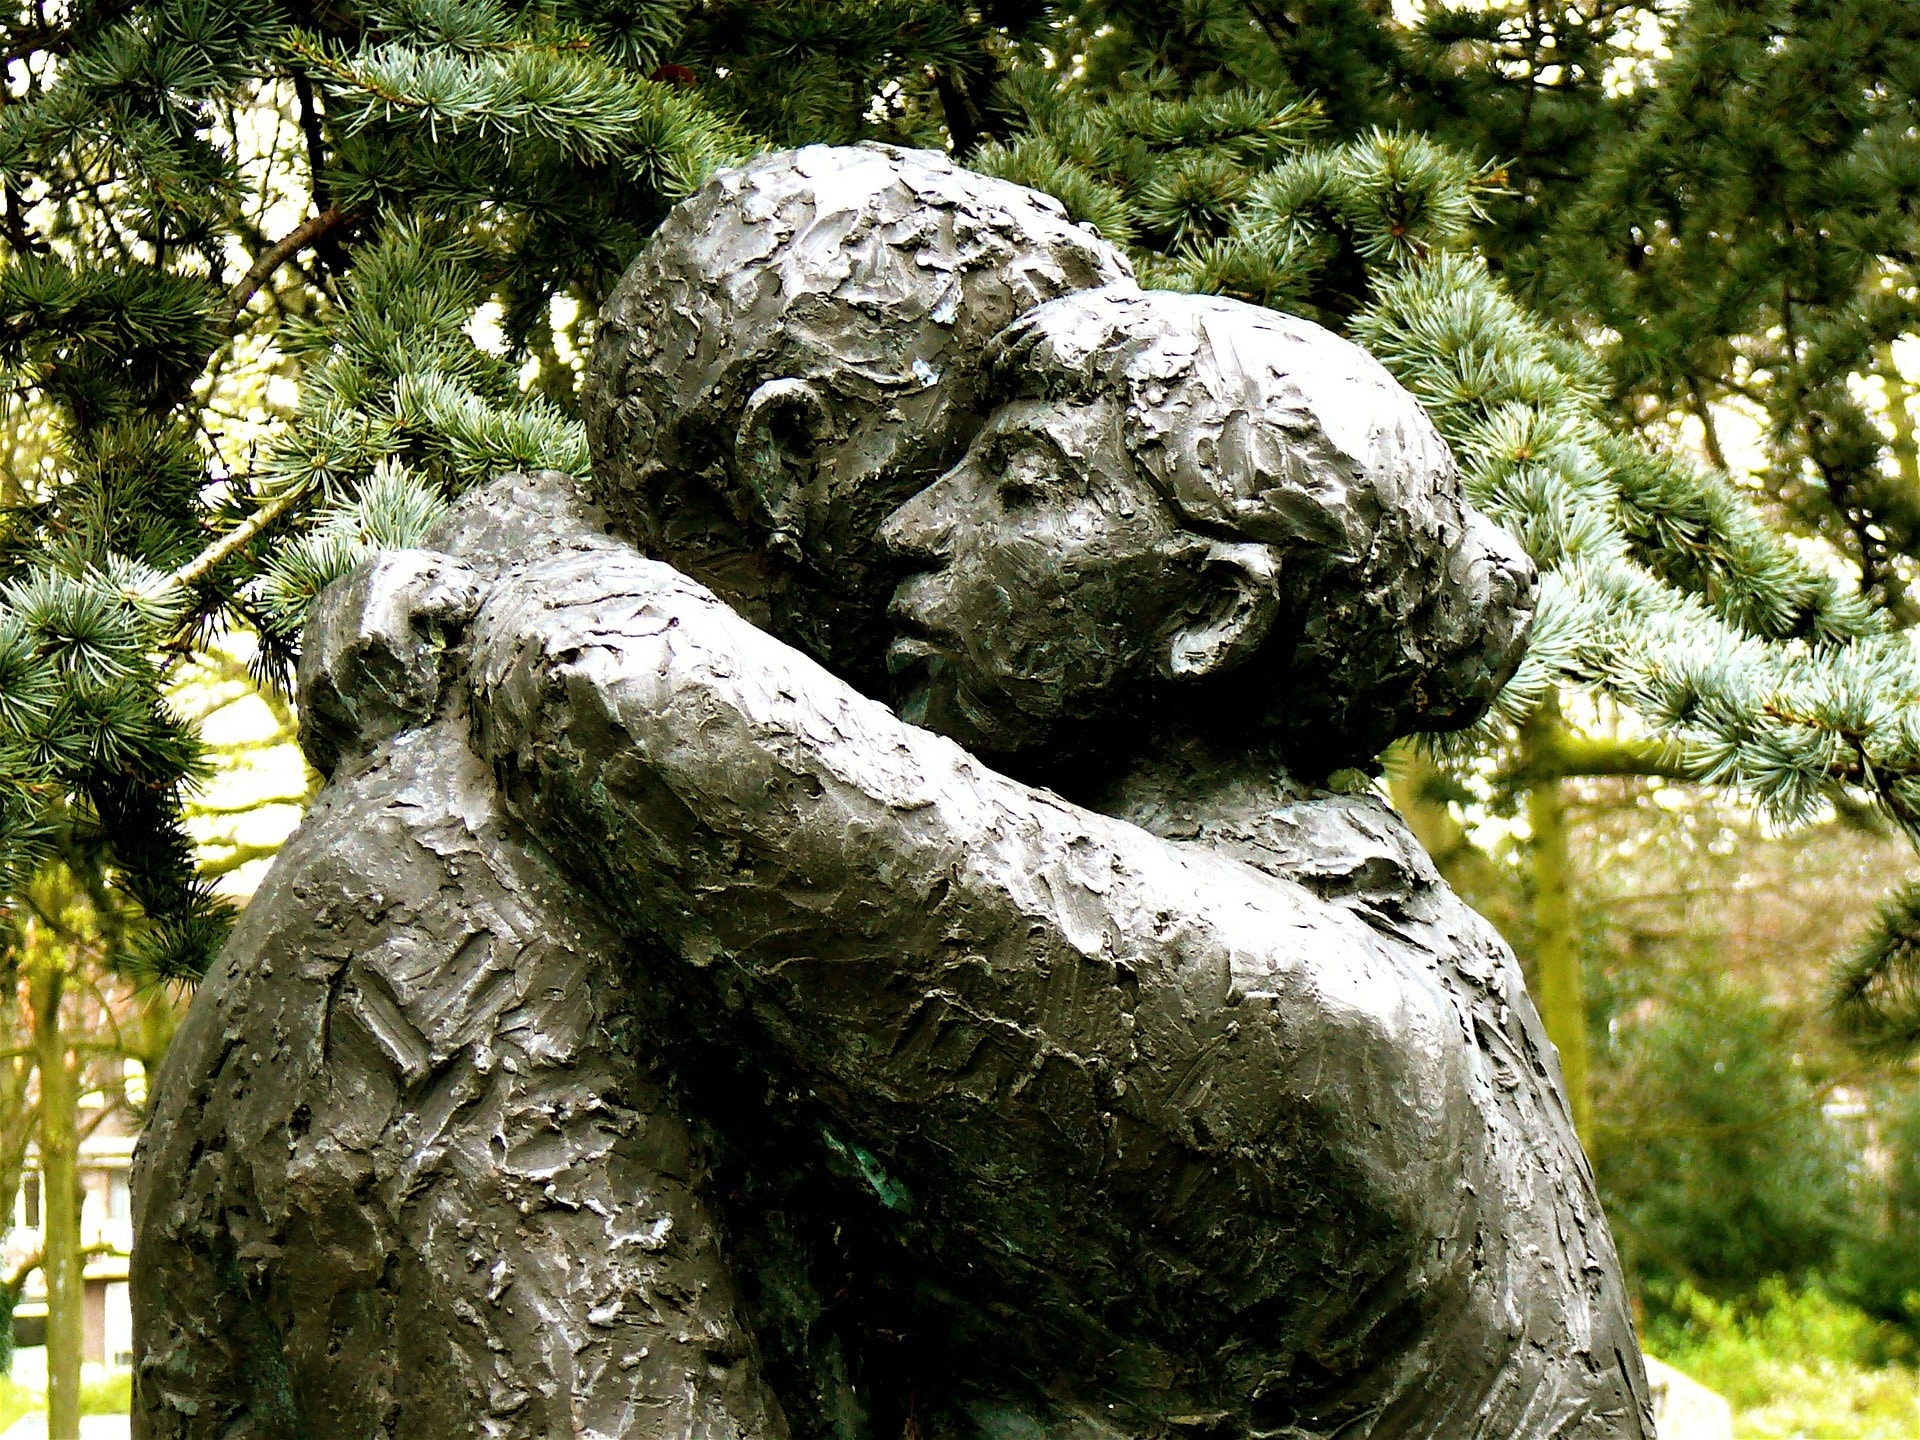 Statue of two people hugging